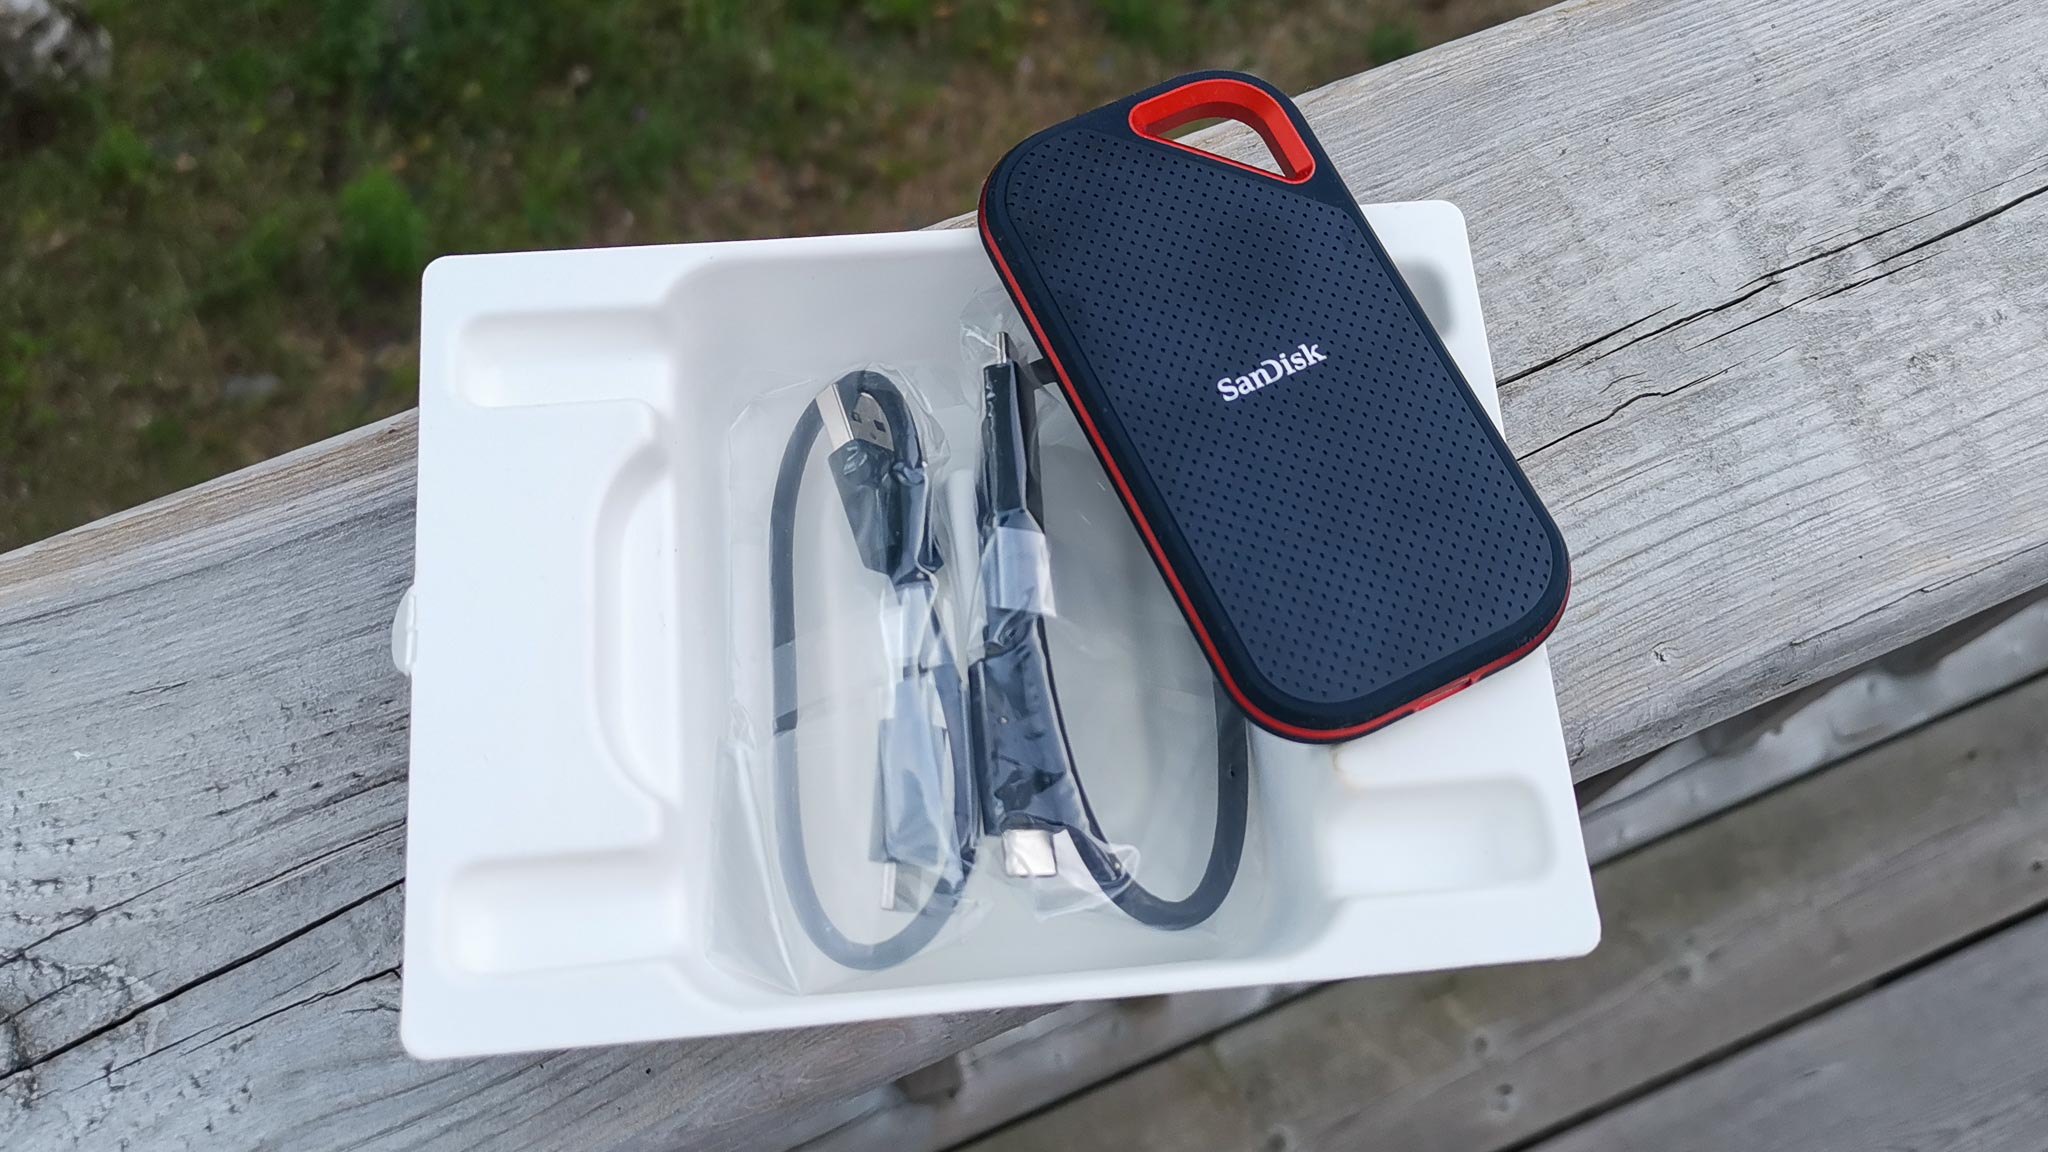 Pitfalls Pleated Swiss SanDisk Extreme Pro Portable SSD Review (1TB) | The SSD Review